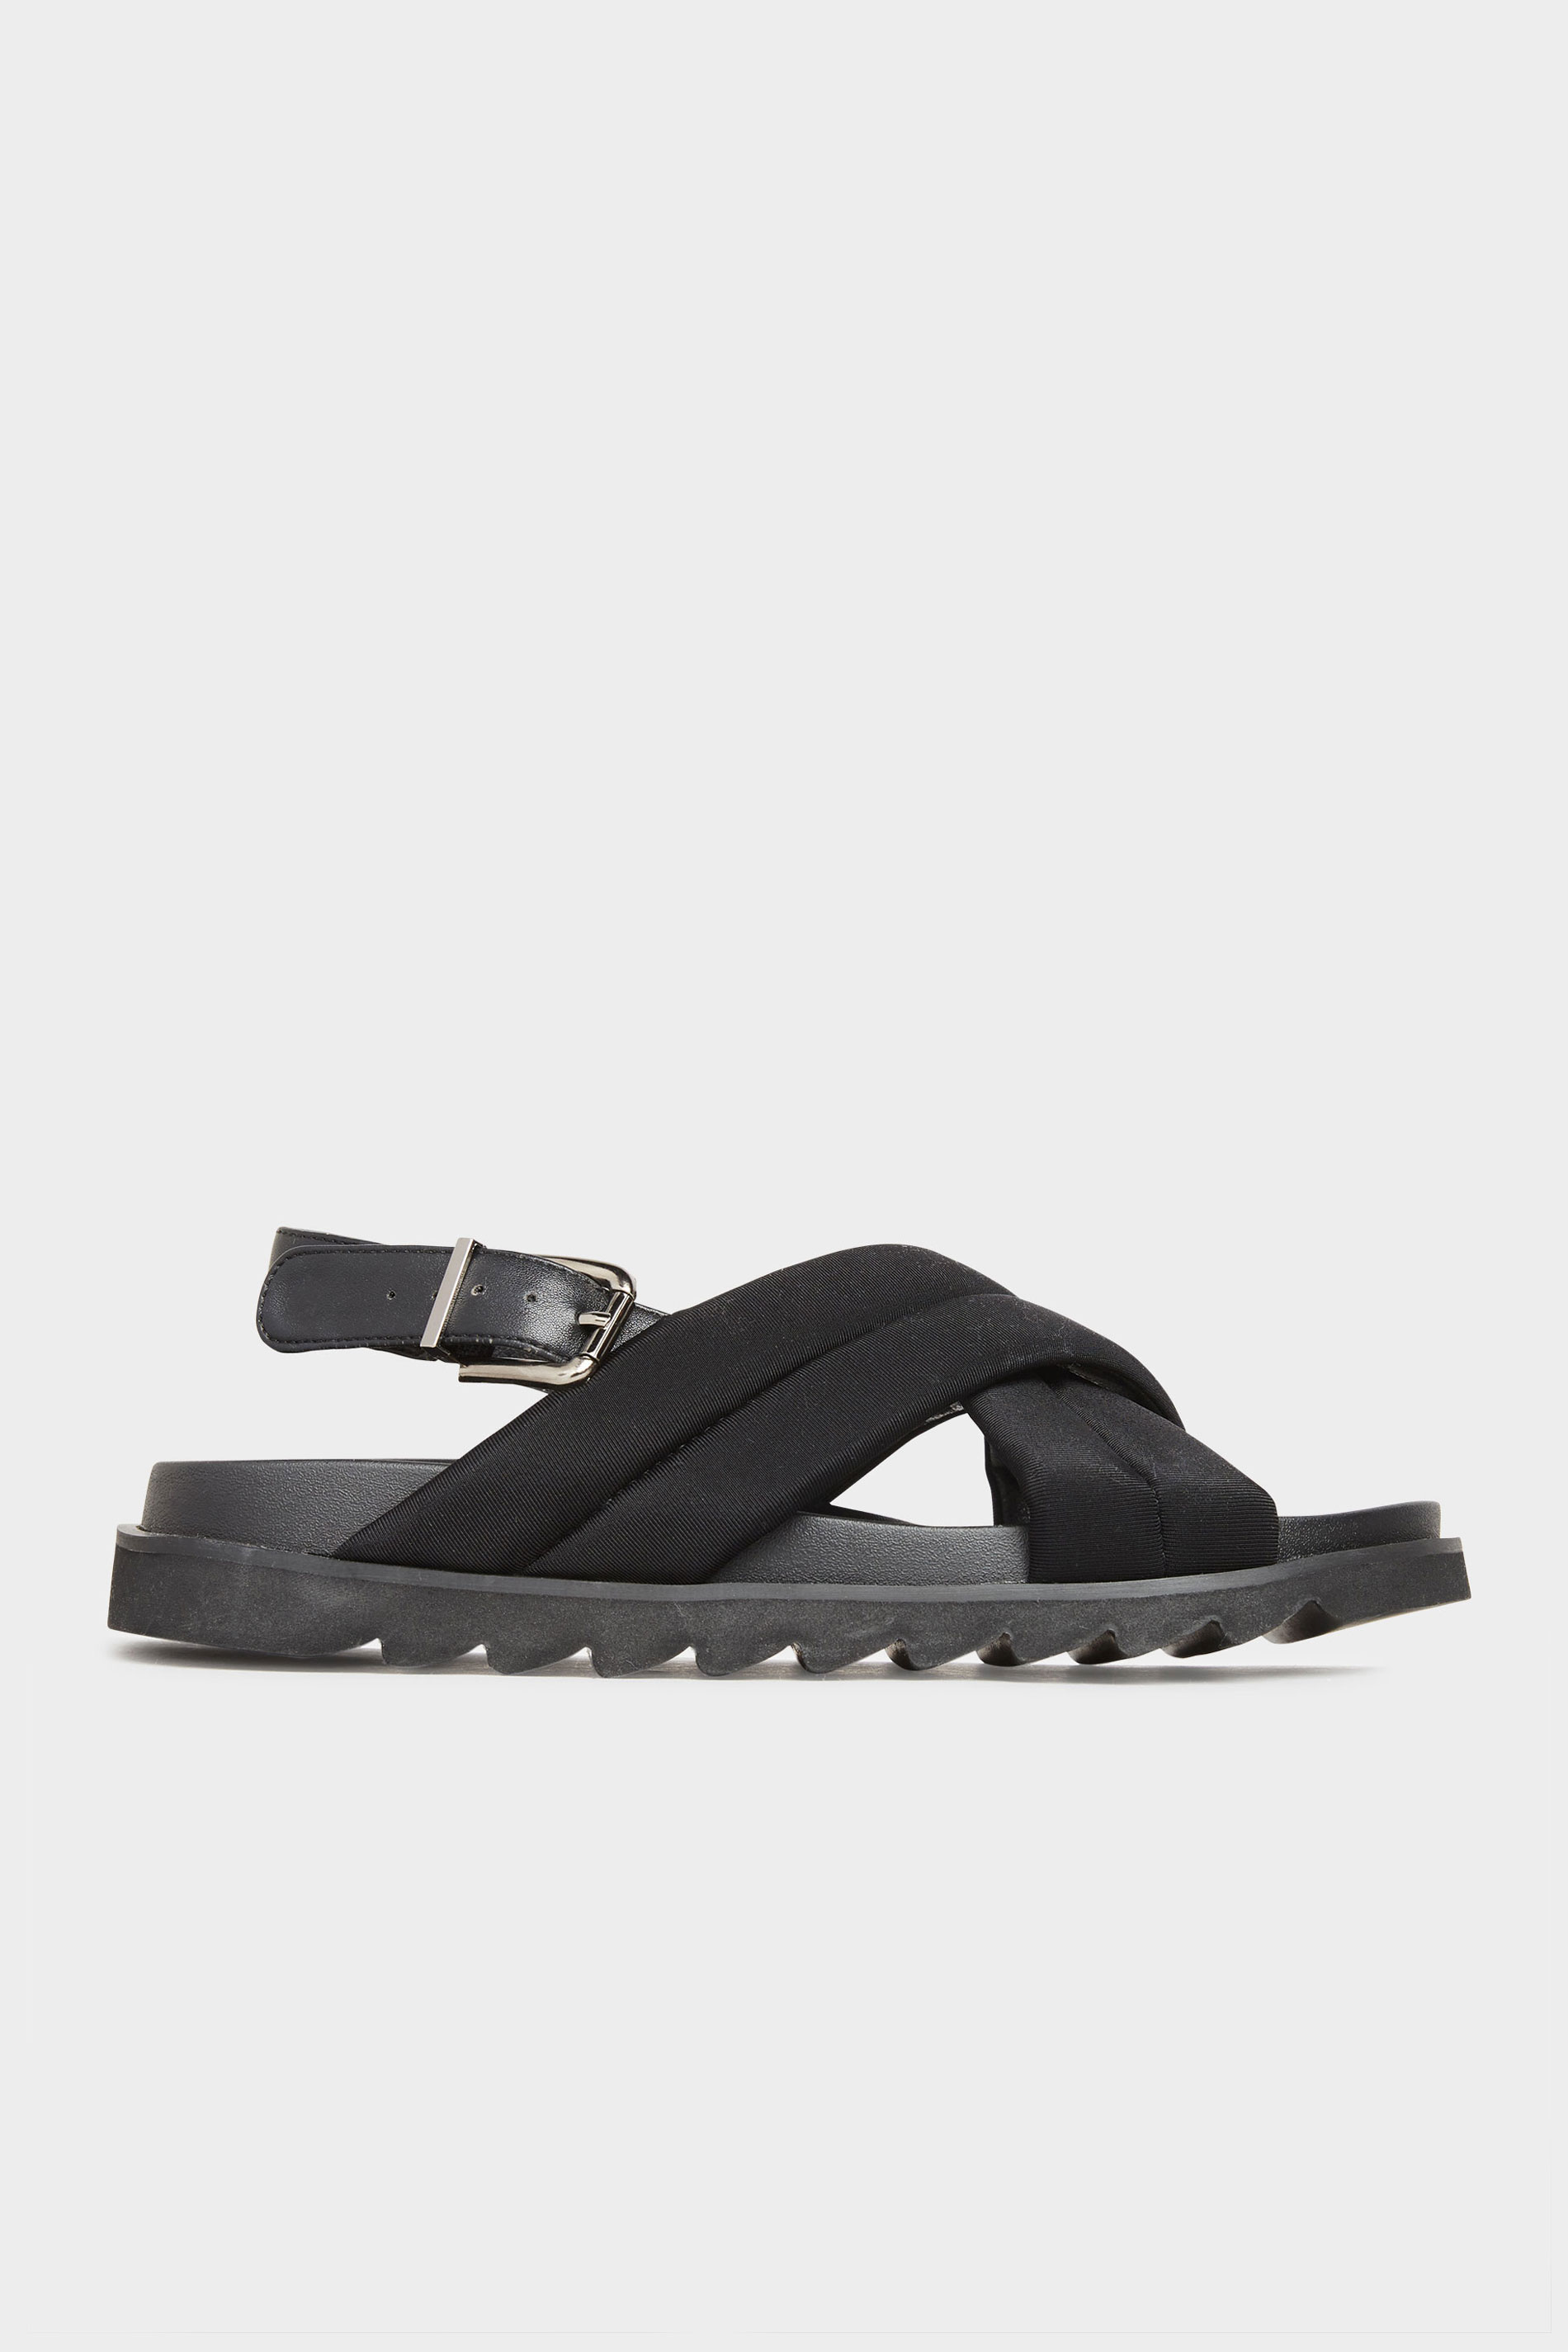 LIMITED COLLECTION Black Padded Sandals In Extra Wide Fit | Long Tall Sally